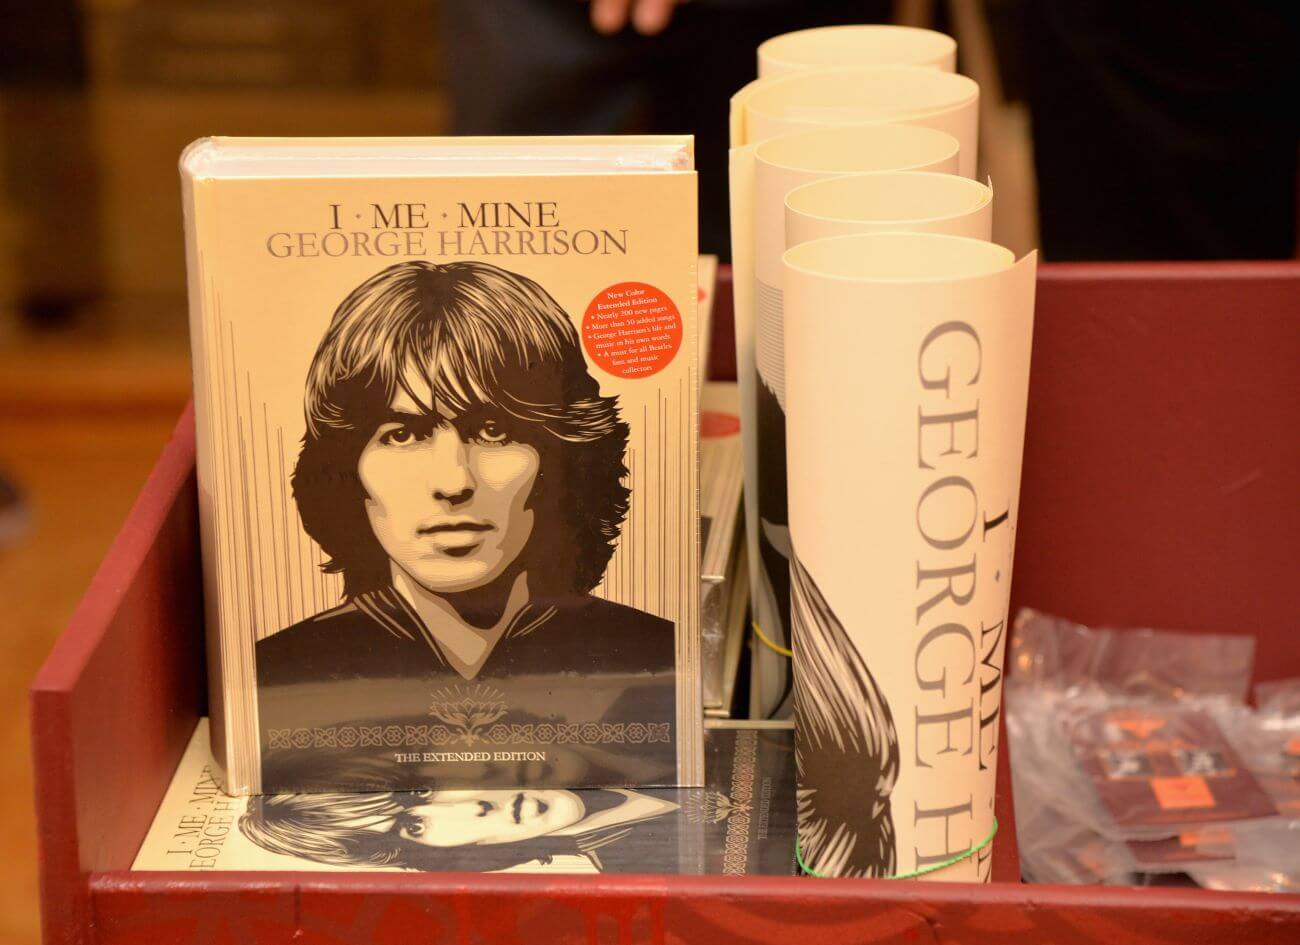 A copy of George Harrison's book "I, Me, Mine," stands up next to five rolled up posters.